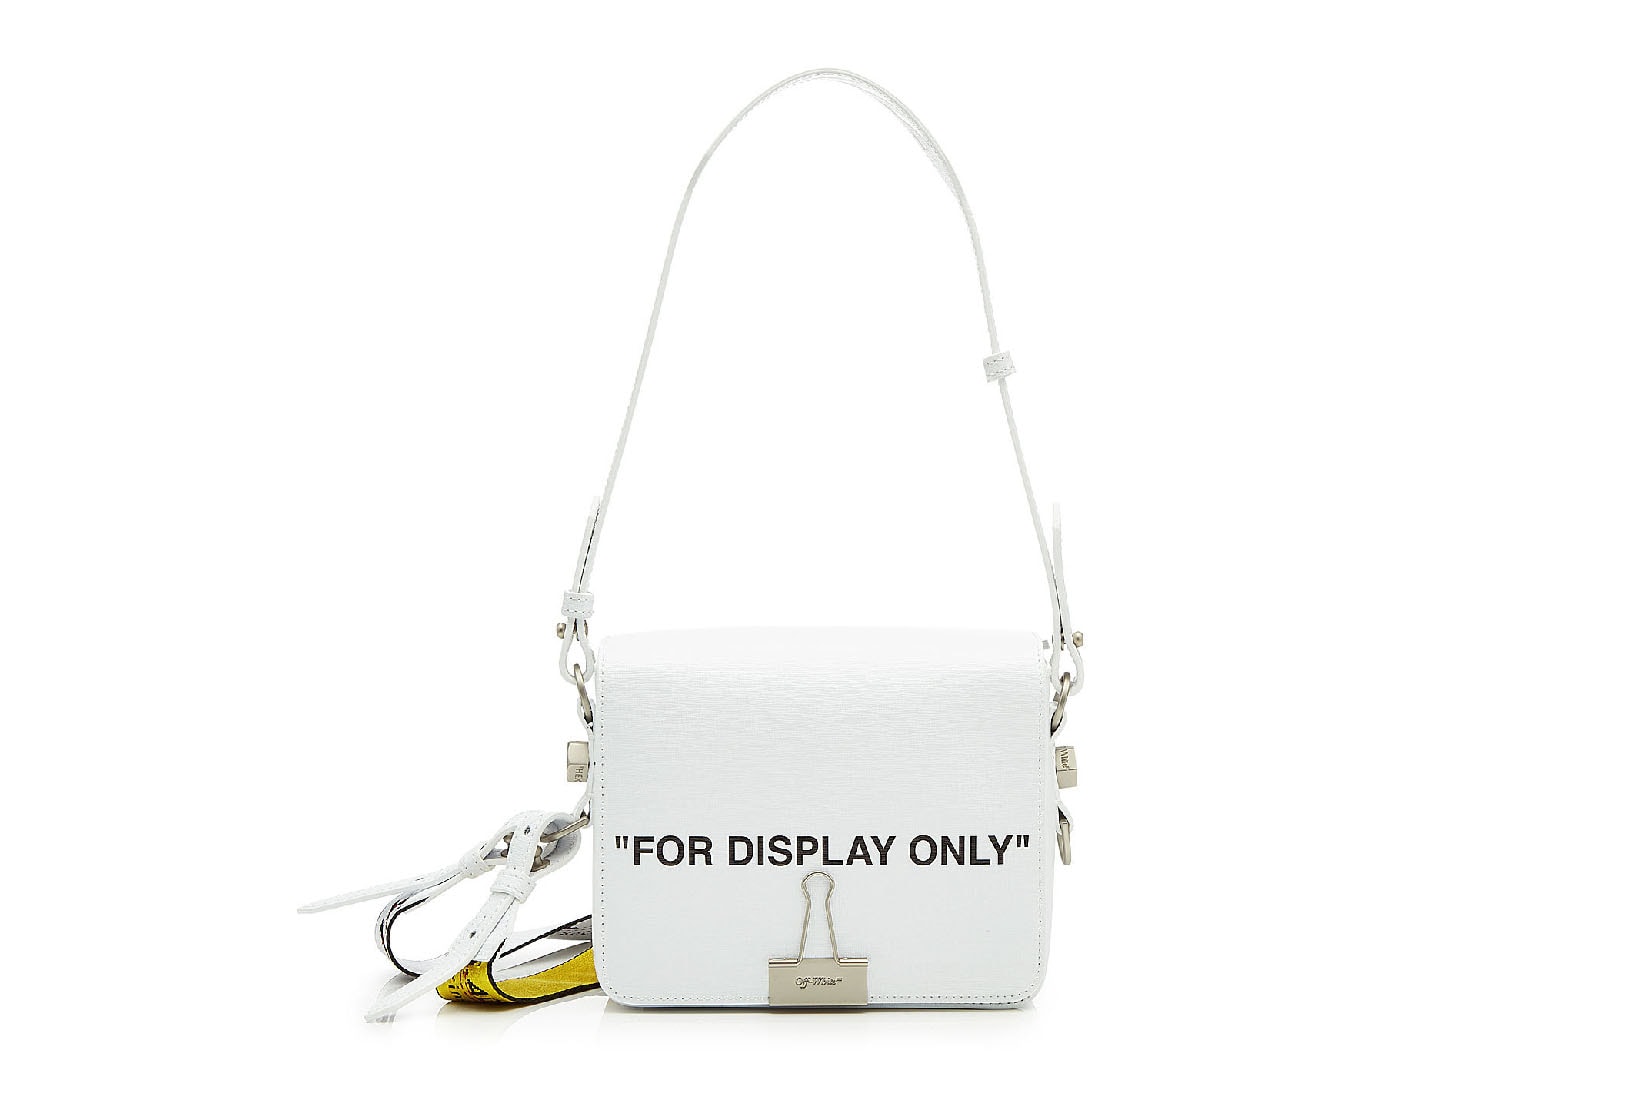 Off-White™ Virgil Was Here Binder Clip Bag For Display Only shoulder bag signed tagged paris france where to buy stylebop.com off white